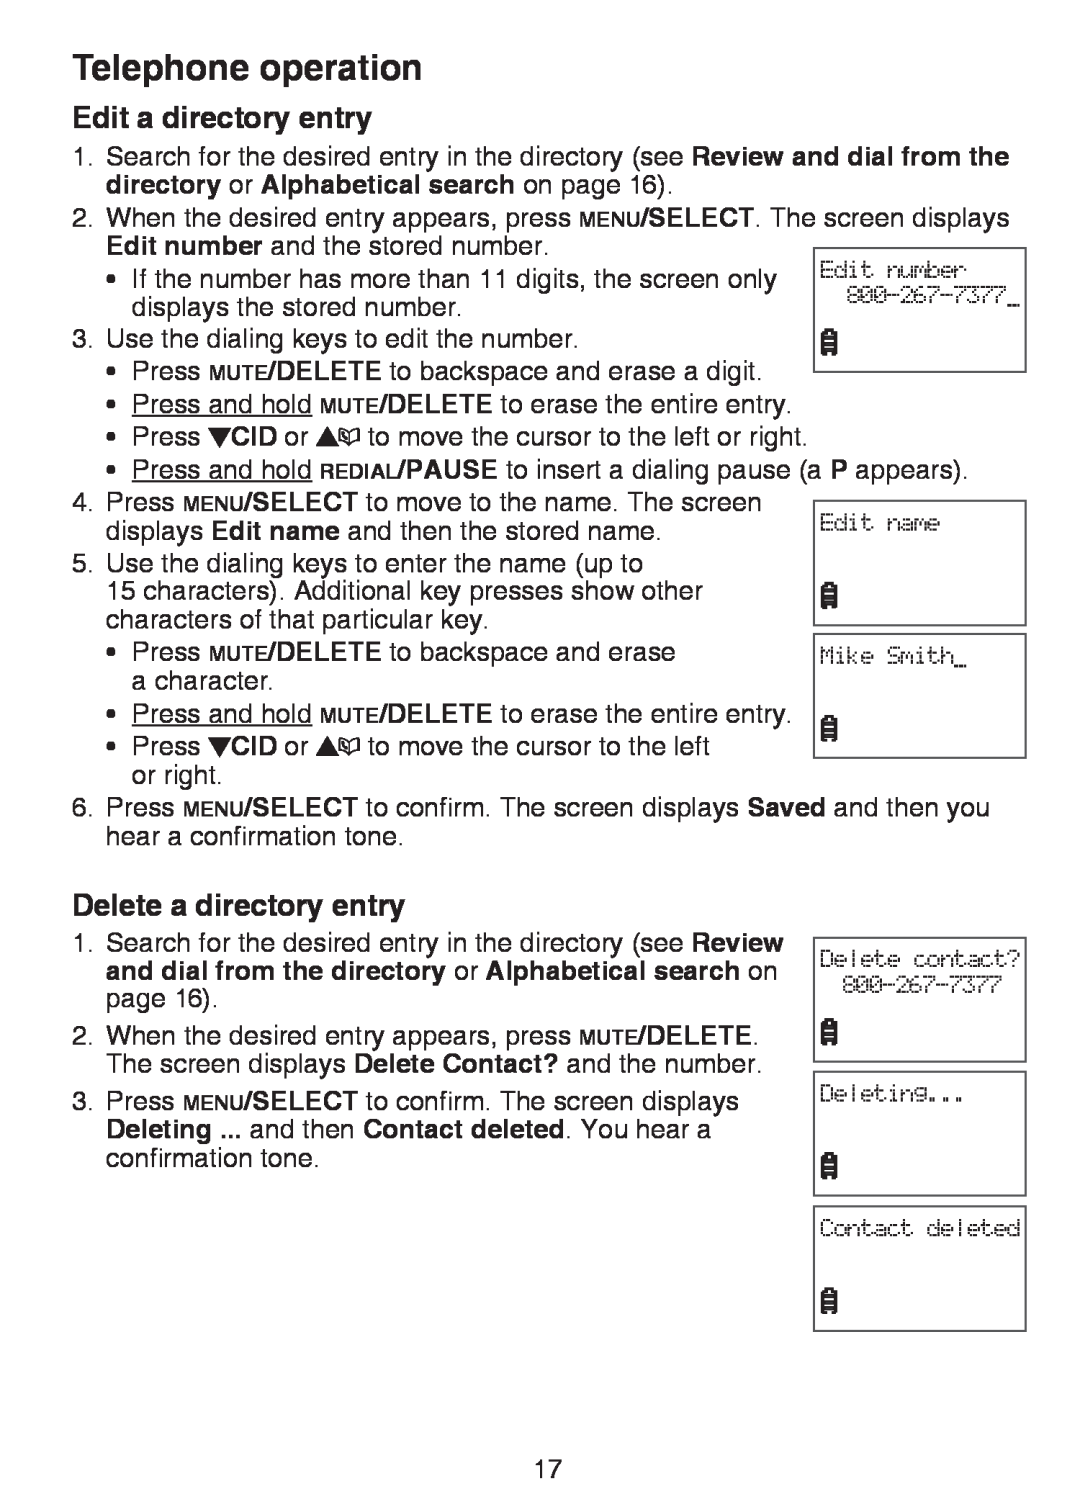 VTech CS6124-2 Edit a directory entry, Delete a directory entry, Telephone operation, Edit number, Edit name Mike Smith 